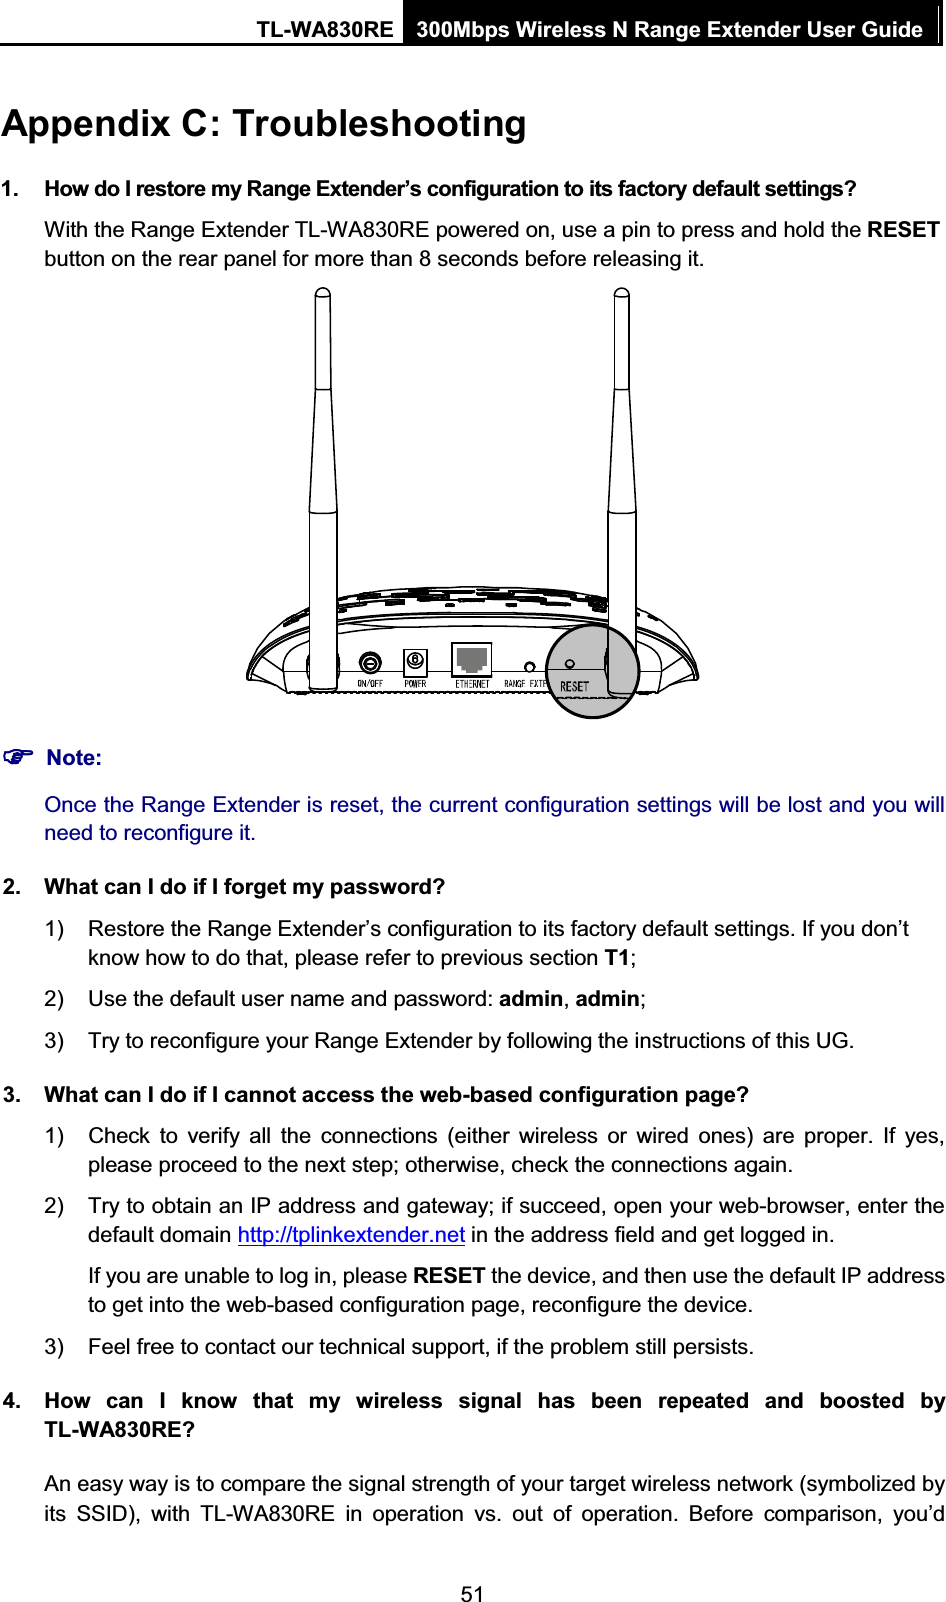 TL-WA830RE  300Mbps Wireless N Range Extender User Guide  51 Appendix C: Troubleshooting 1.  How do I restore my Range Extender’s configuration to its factory default settings? With the Range Extender TL-WA830RE powered on, use a pin to press and hold the RESET button on the rear panel for more than 8 seconds before releasing it.  )) Note: Once the Range Extender is reset, the current configuration settings will be lost and you will need to reconfigure it. 2.  What can I do if I forget my password? 1)  Restore the Range Extender’s configuration to its factory default settings. If you don’tknow how to do that, please refer to previous section T1; 2)  Use the default user name and password: admin, admin; 3)  Try to reconfigure your Range Extender by following the instructions of this UG. 3.  What can I do if I cannot access the web-based configuration page? 1)  Check to verify all the connections (either wireless or wired ones) are proper. If yes, please proceed to the next step; otherwise, check the connections again. 2)  Try to obtain an IP address and gateway; if succeed, open your web-browser, enter the default domain http://tplinkextender.net in the address field and get logged in. If you are unable to log in, please RESET the device, and then use the default IP address to get into the web-based configuration page, reconfigure the device. 3)  Feel free to contact our technical support, if the problem still persists. 4.  How can I know that my wireless signal has been repeated and boosted by TL-WA830RE? An easy way is to compare the signal strength of your target wireless network (symbolized by its SSID), with TL-WA830RE in operation vs. out of operation. Before comparison, you’d 